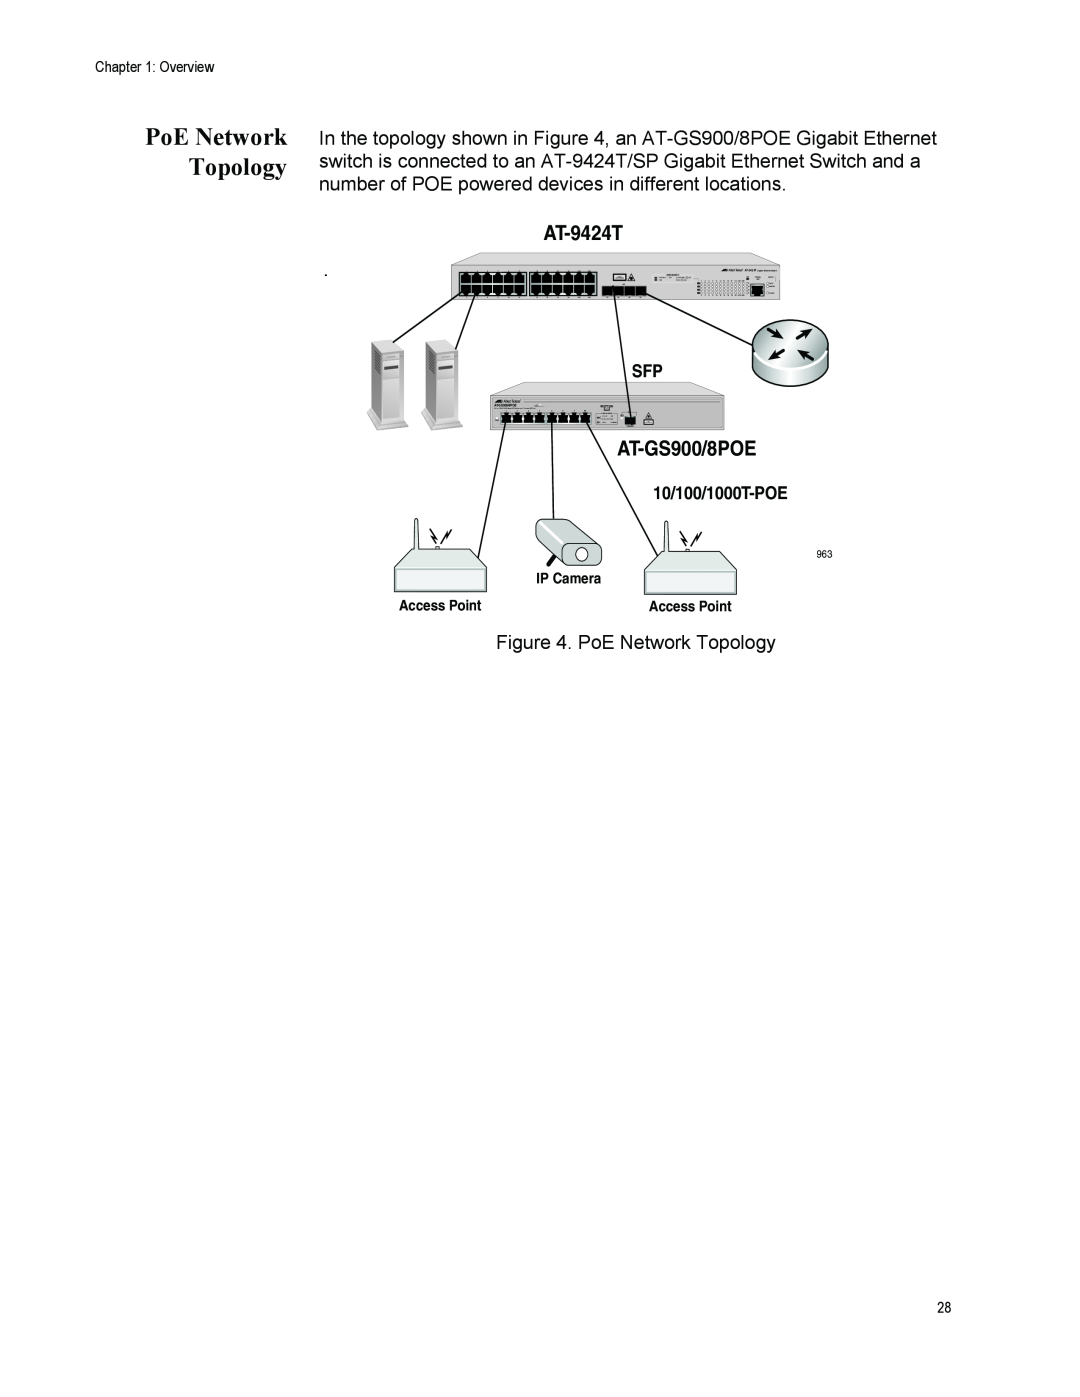 Allied Telesis manual PoE Network Topology, AT-9424T, AT-GS900/8POE 